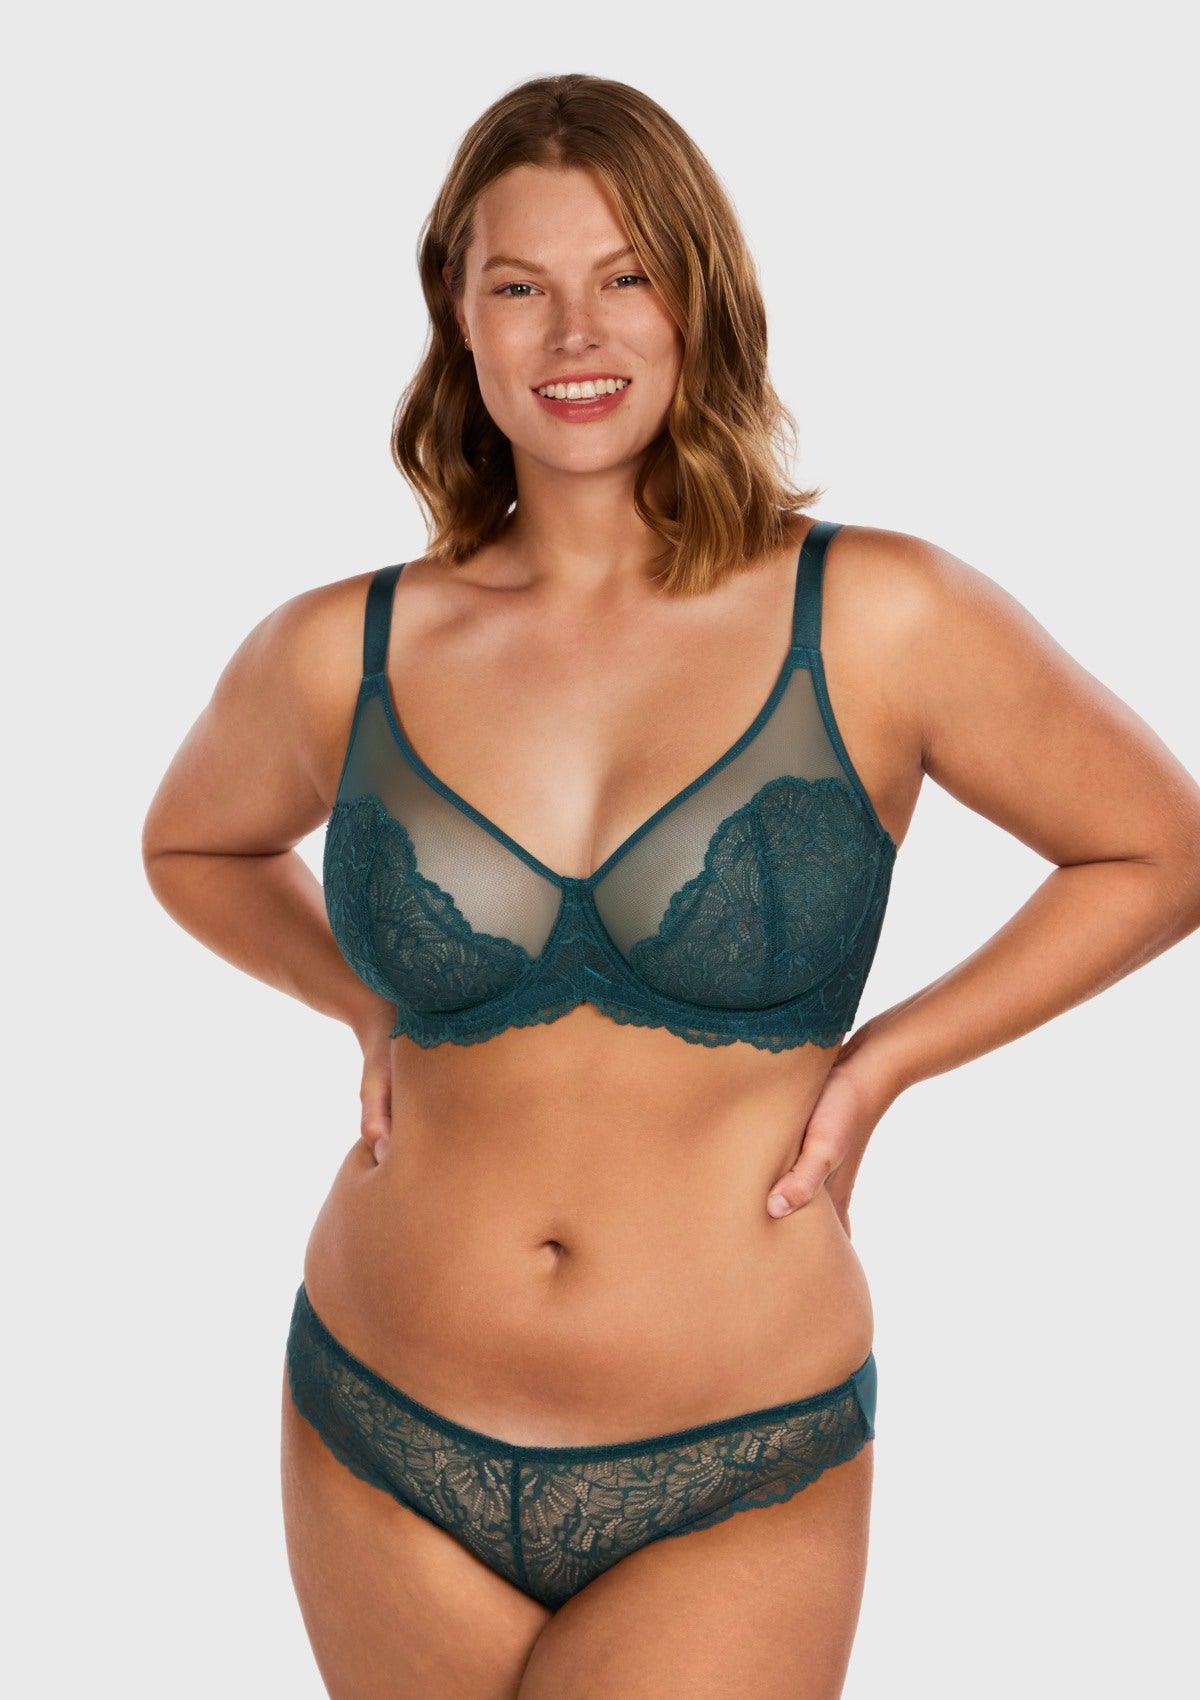 HSIA Blossom Full Figure See-Through Lace Bra For Side And Back Fat - Balsam Blue / 44 / D